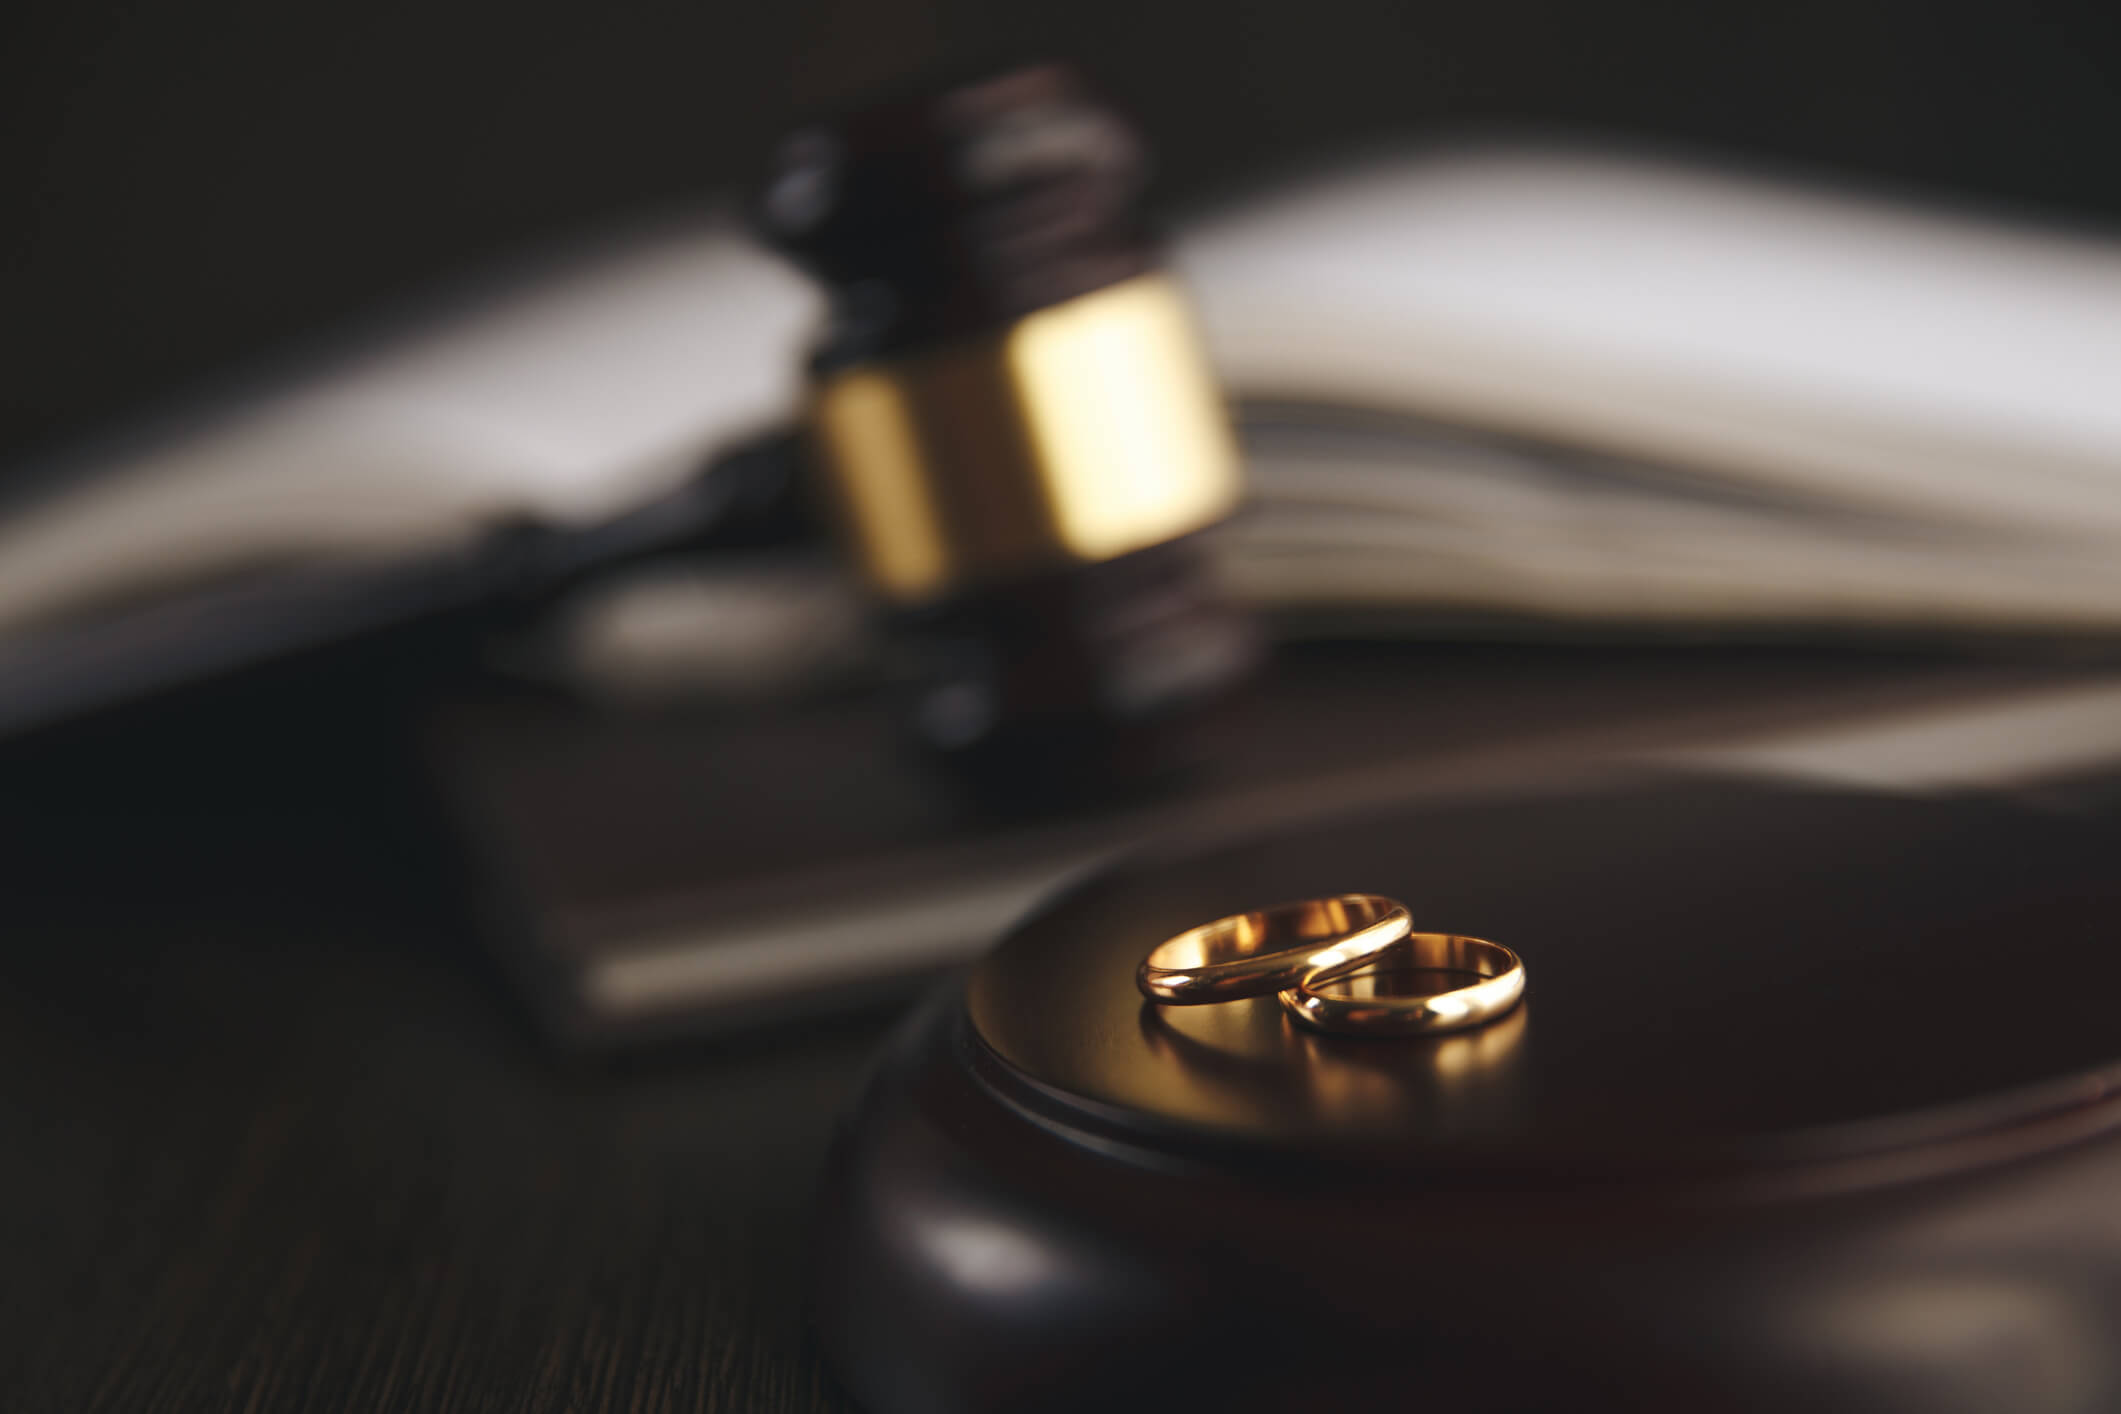 Two wedding rings separate on a desk, signifying divorce.